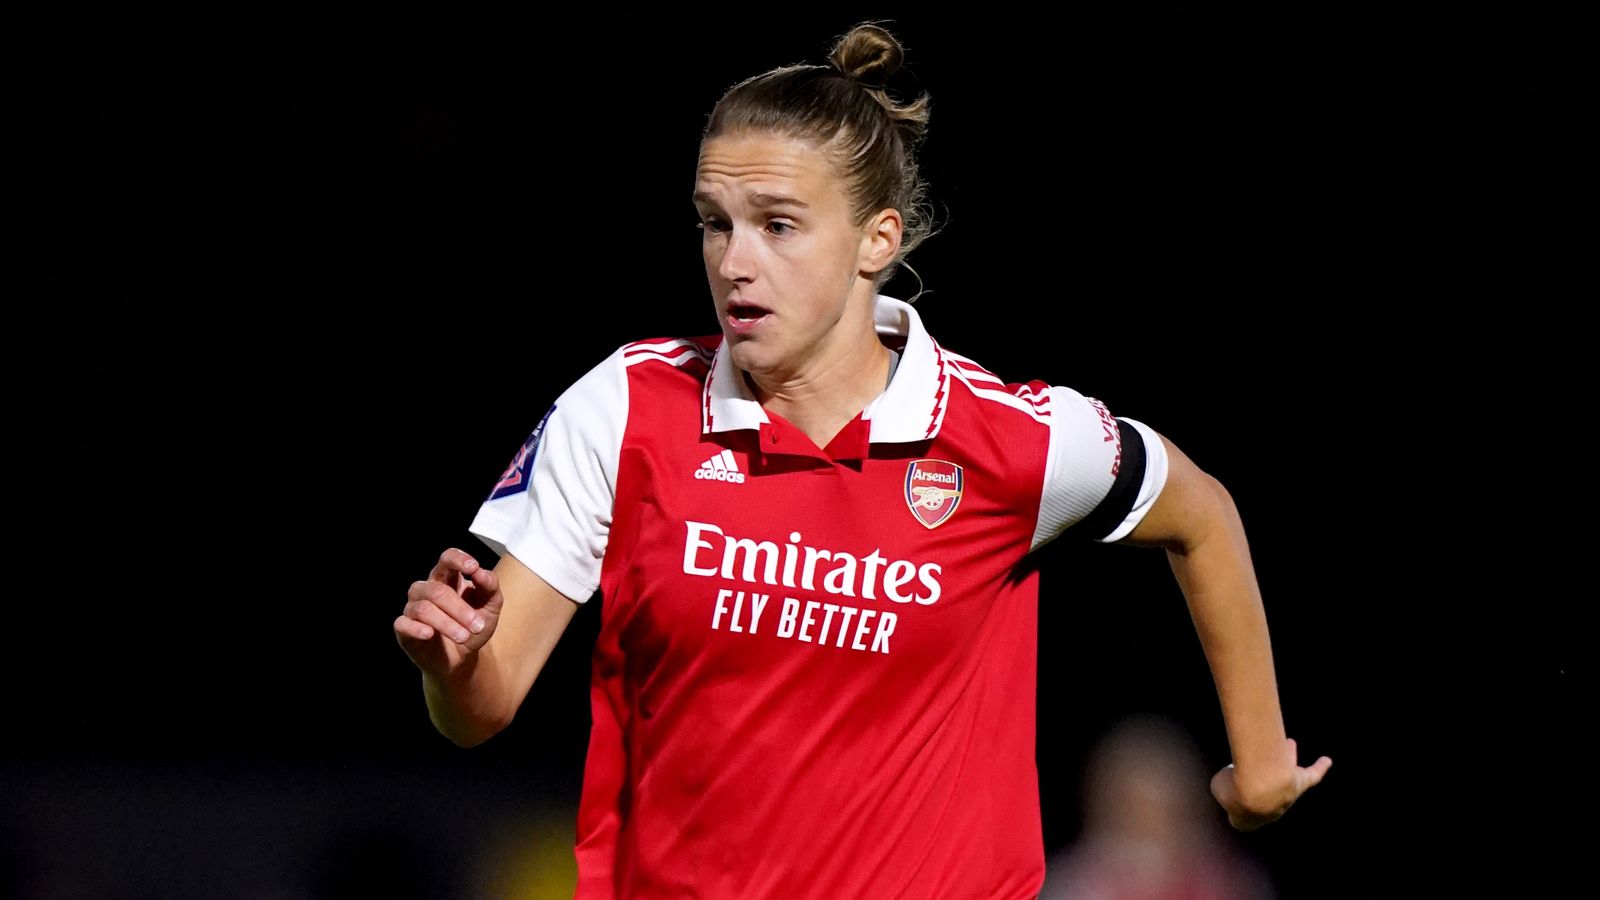 vivianne-miedema-arsenal-forward-given-time-off-to-rest-and-recharge-and-expected-to-return-after-international-break